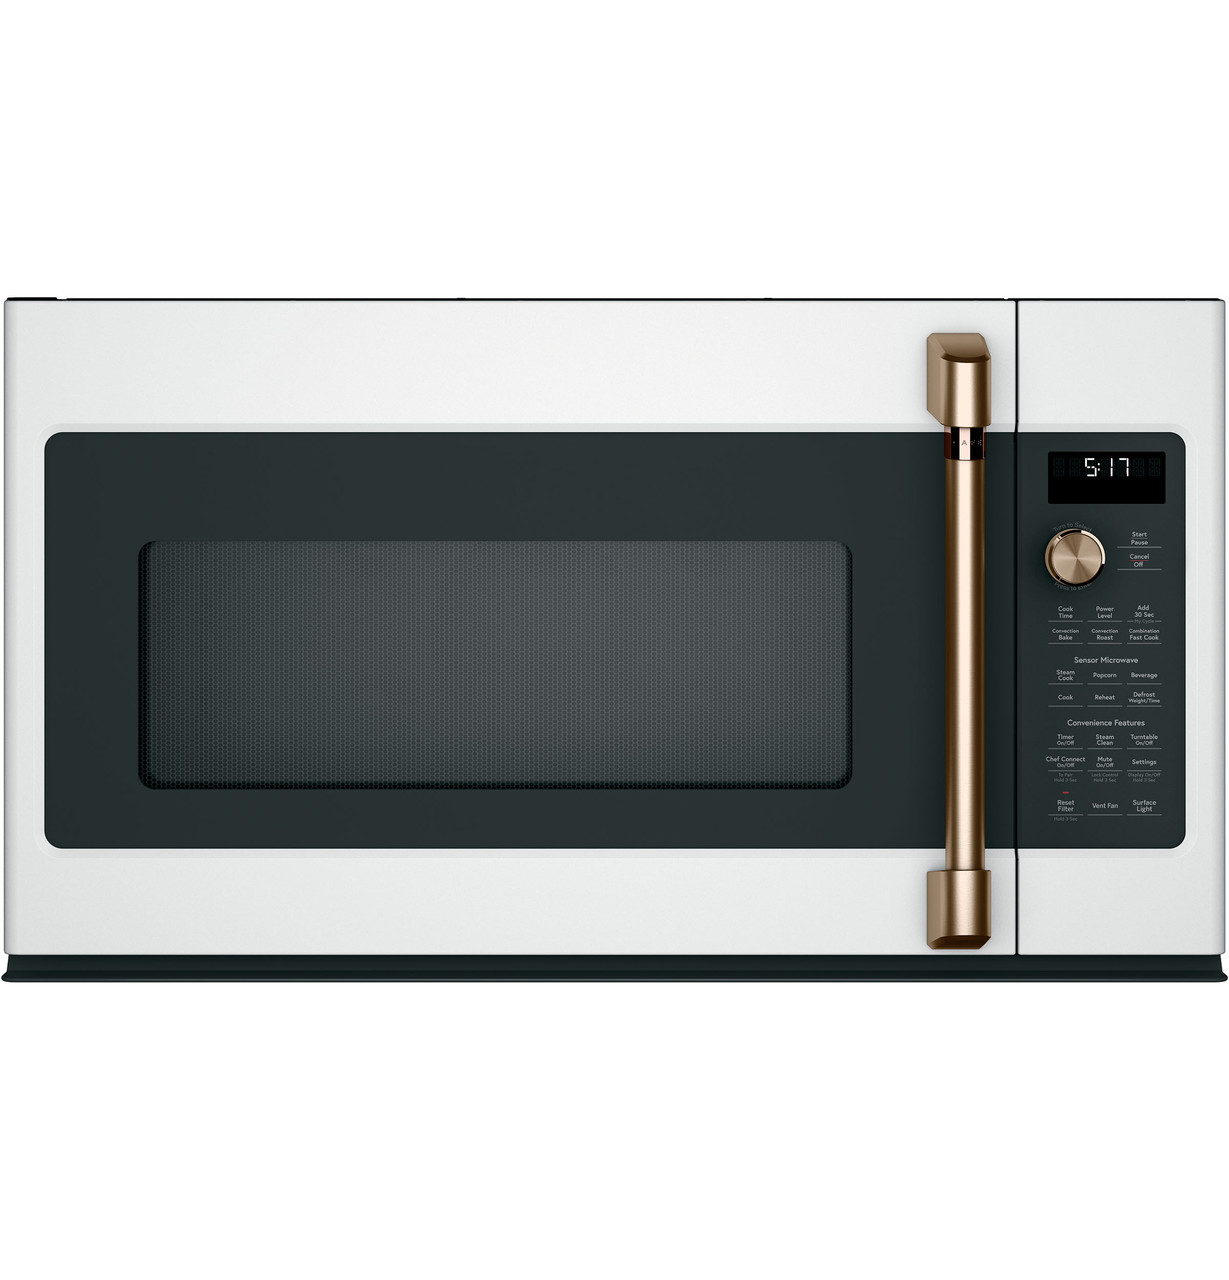 How to Set Clock on Cafe Microwave: Quick & Simple Guide